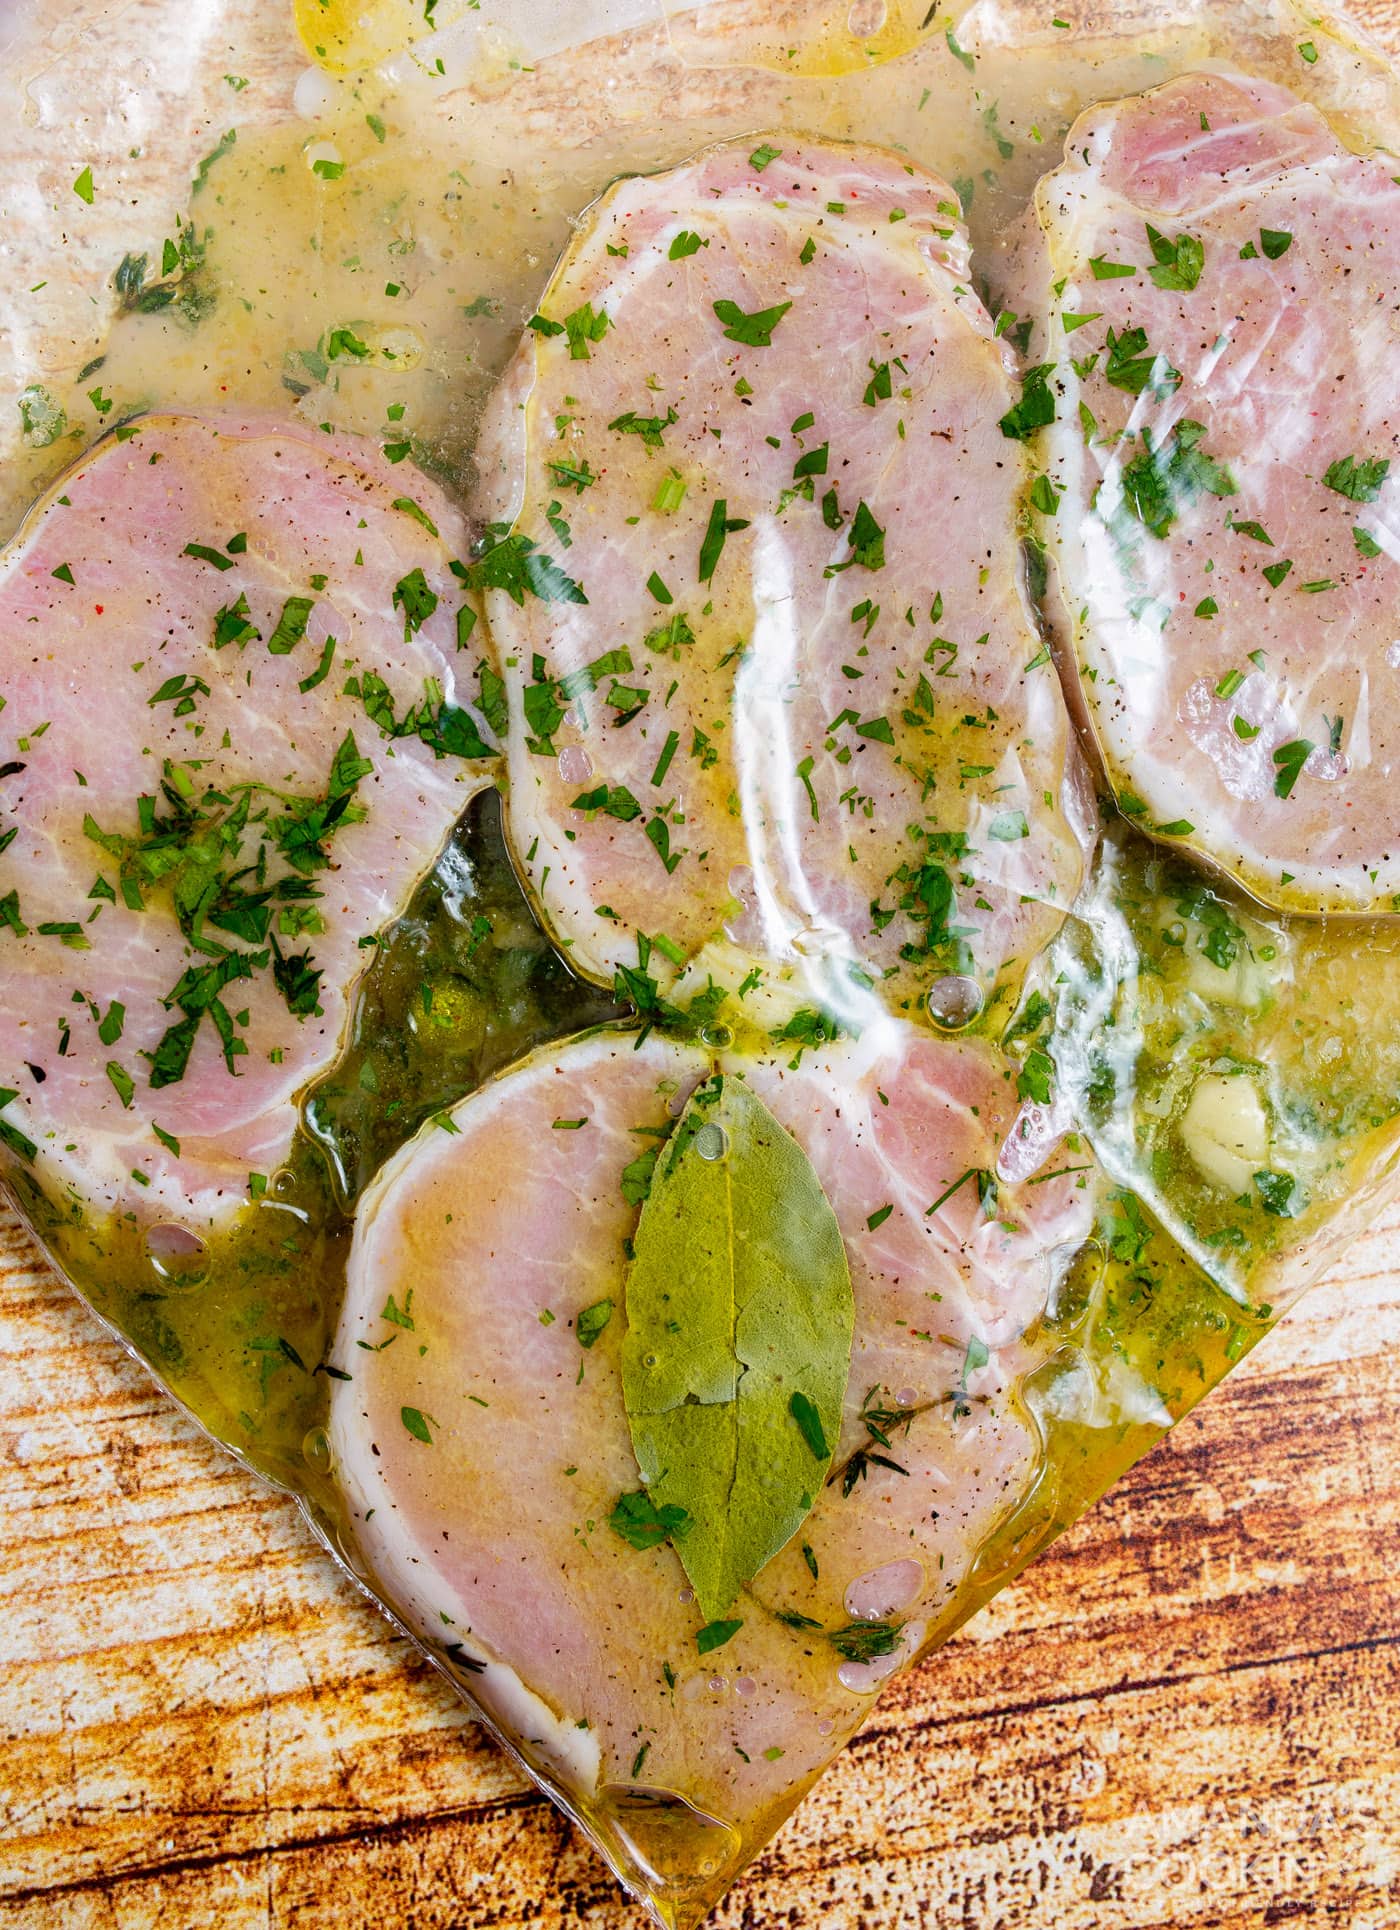 pork chops covered in marinade